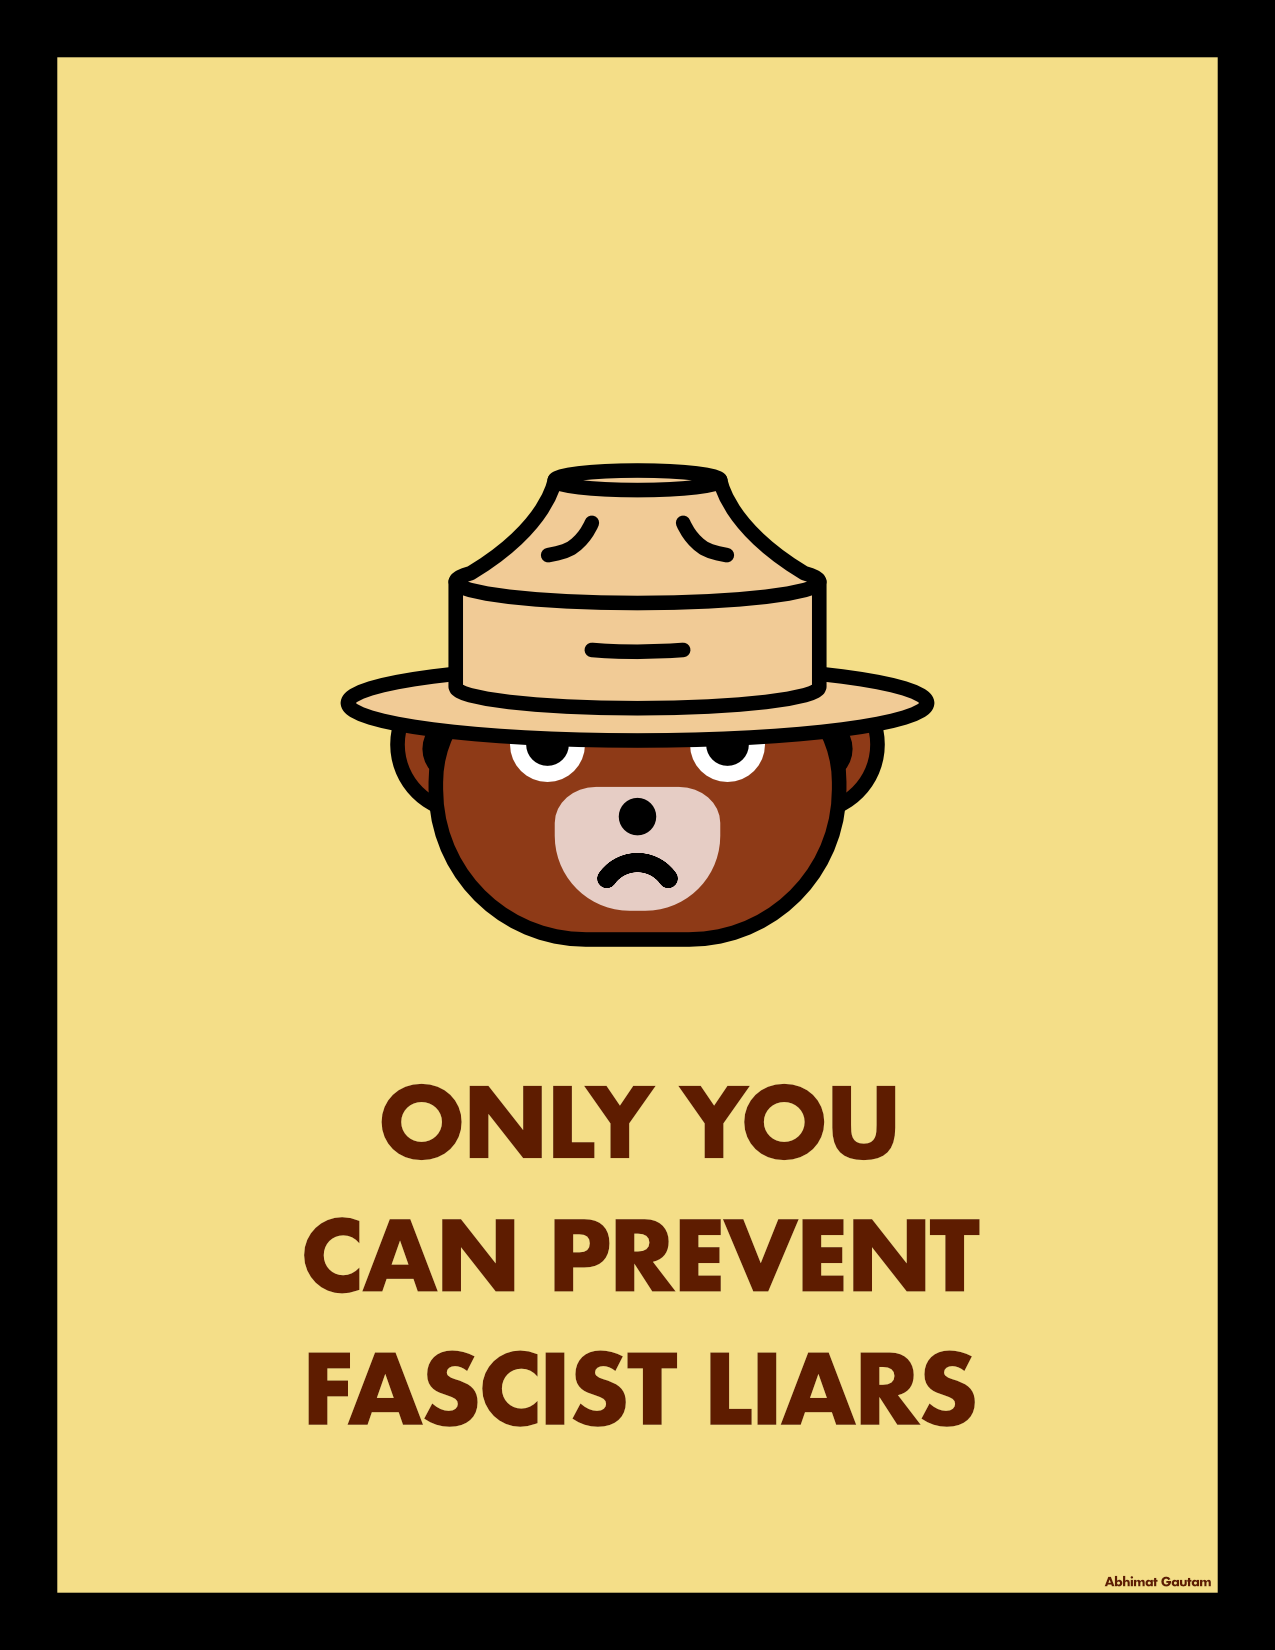 Smokey says only you can prevent Fascist Liars